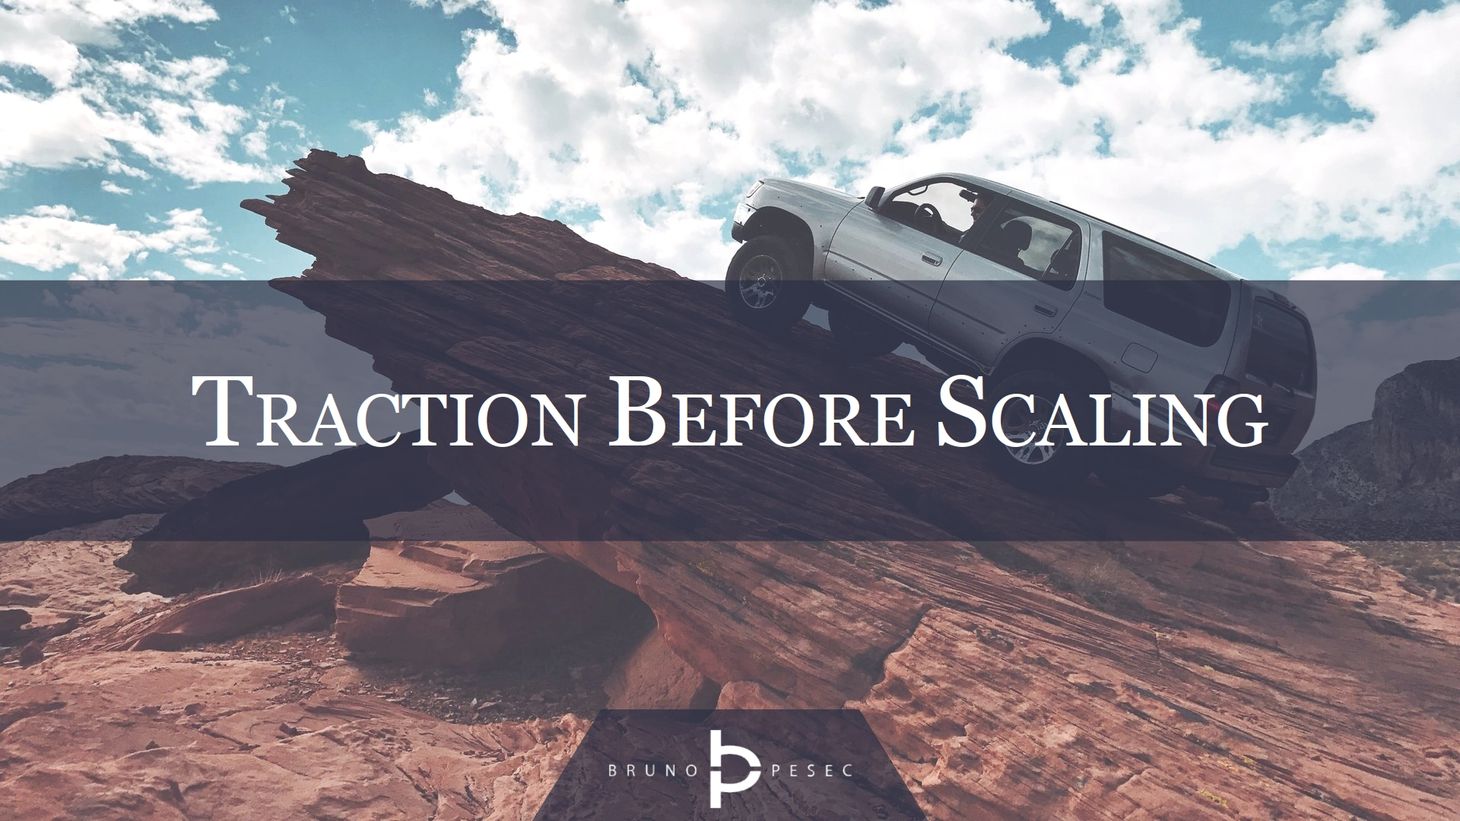 Traction before scaling